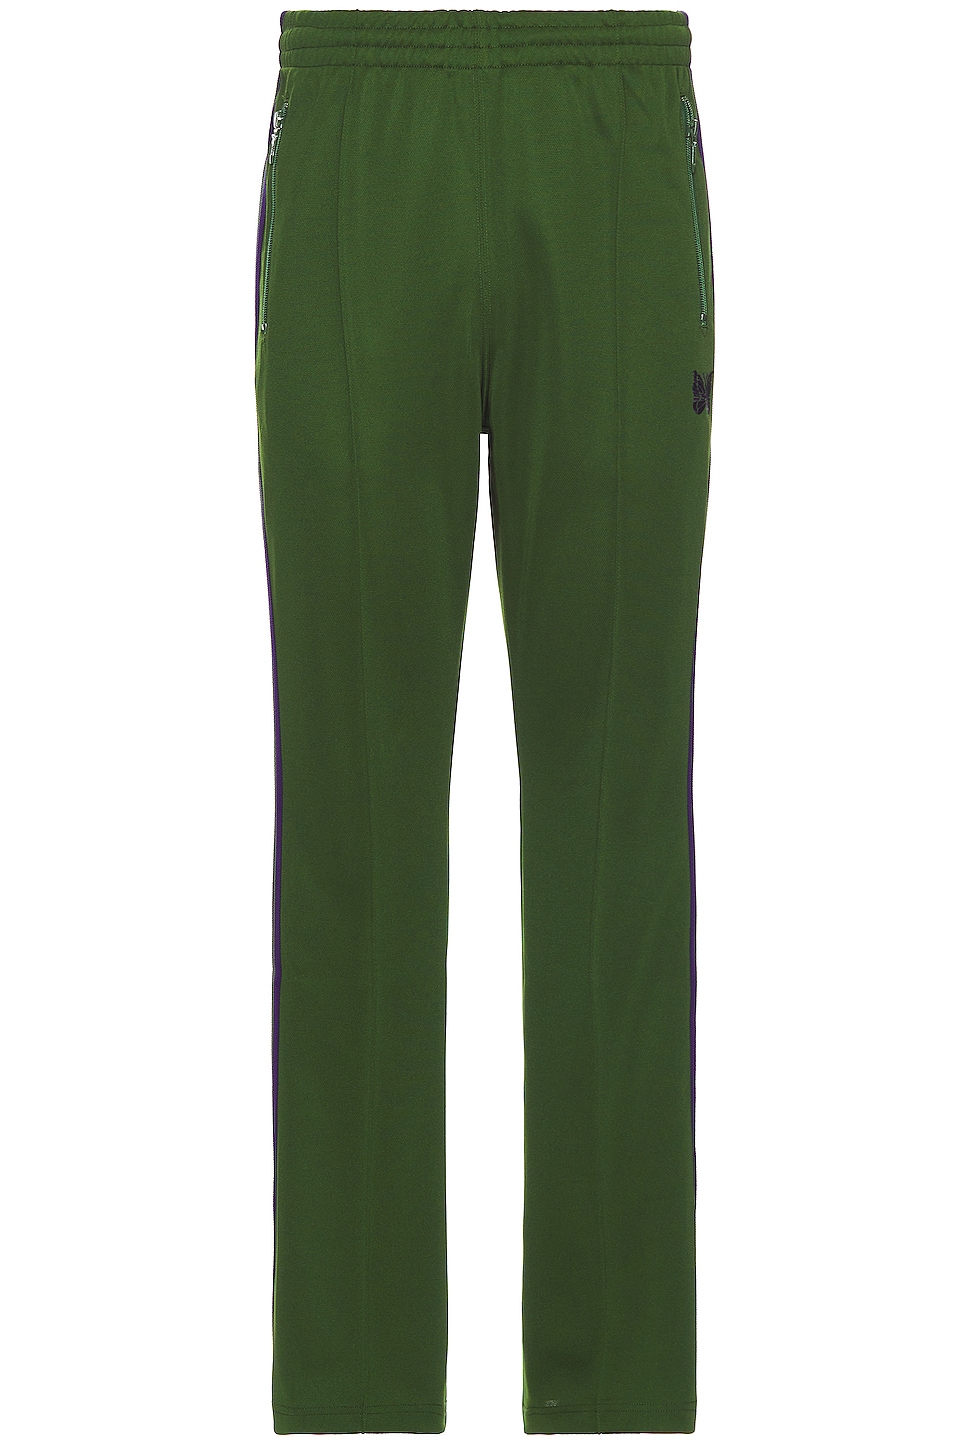 Image 1 of Needles Boot Cut Track Pant in Ivy Green